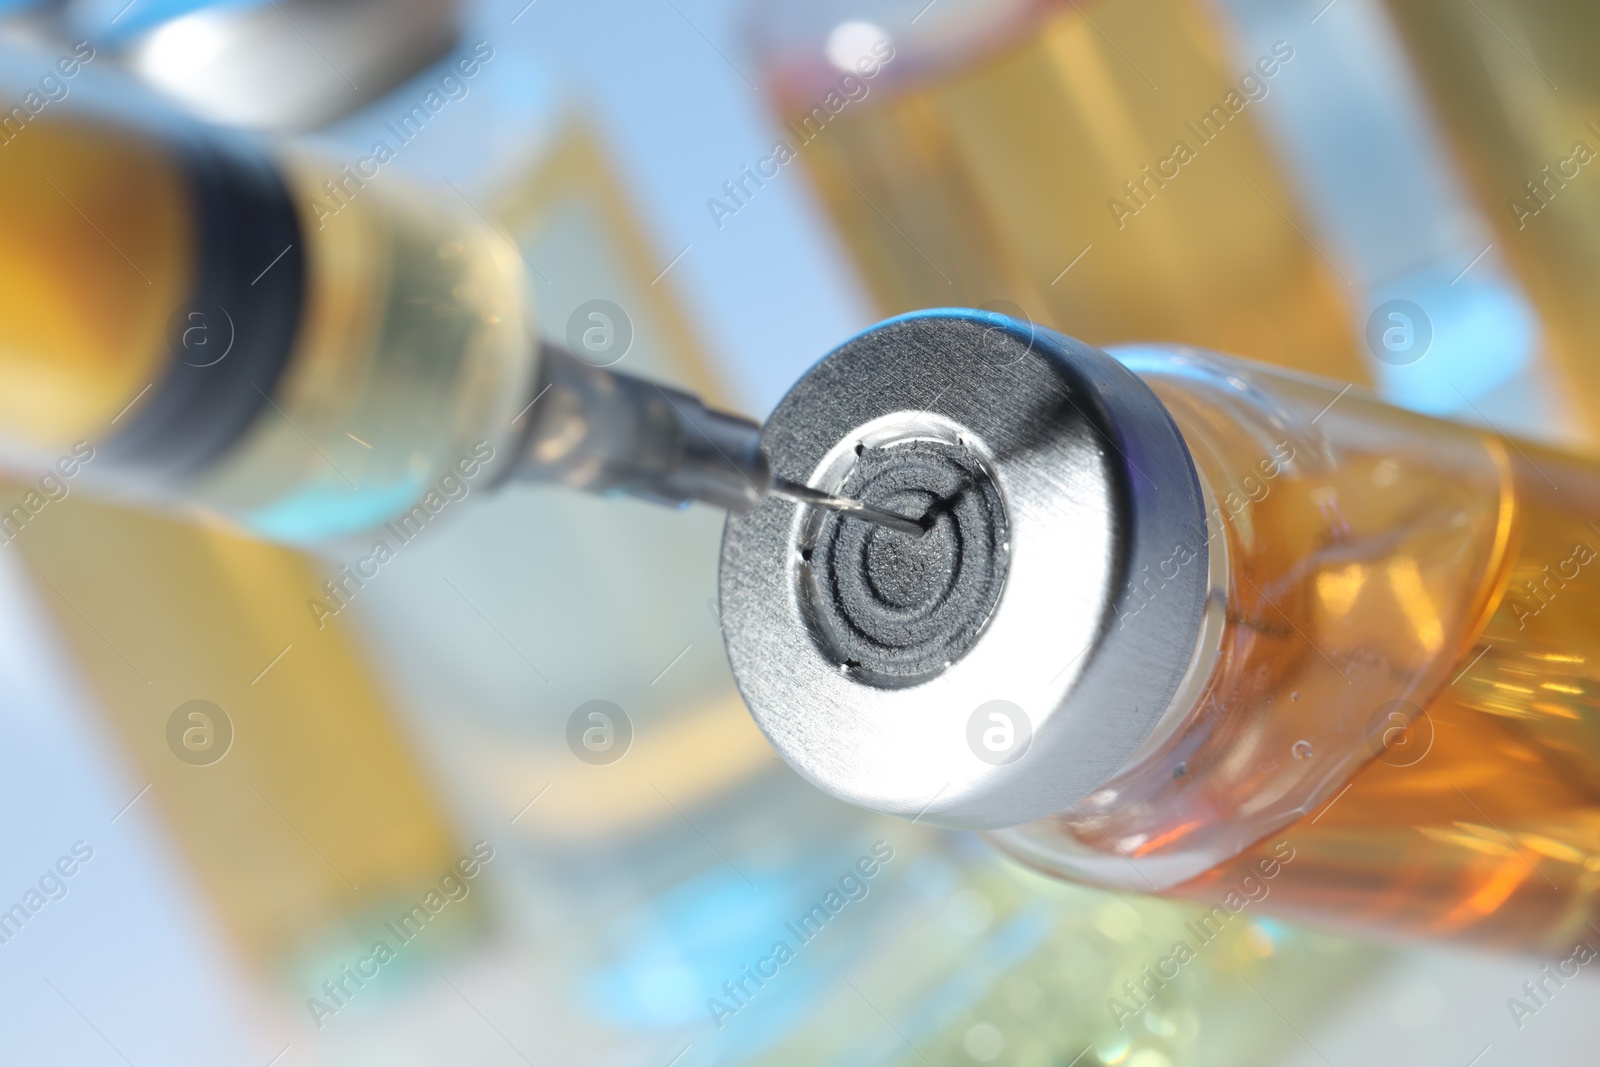 Photo of Filling syringe with orange medication from glass vial, closeup